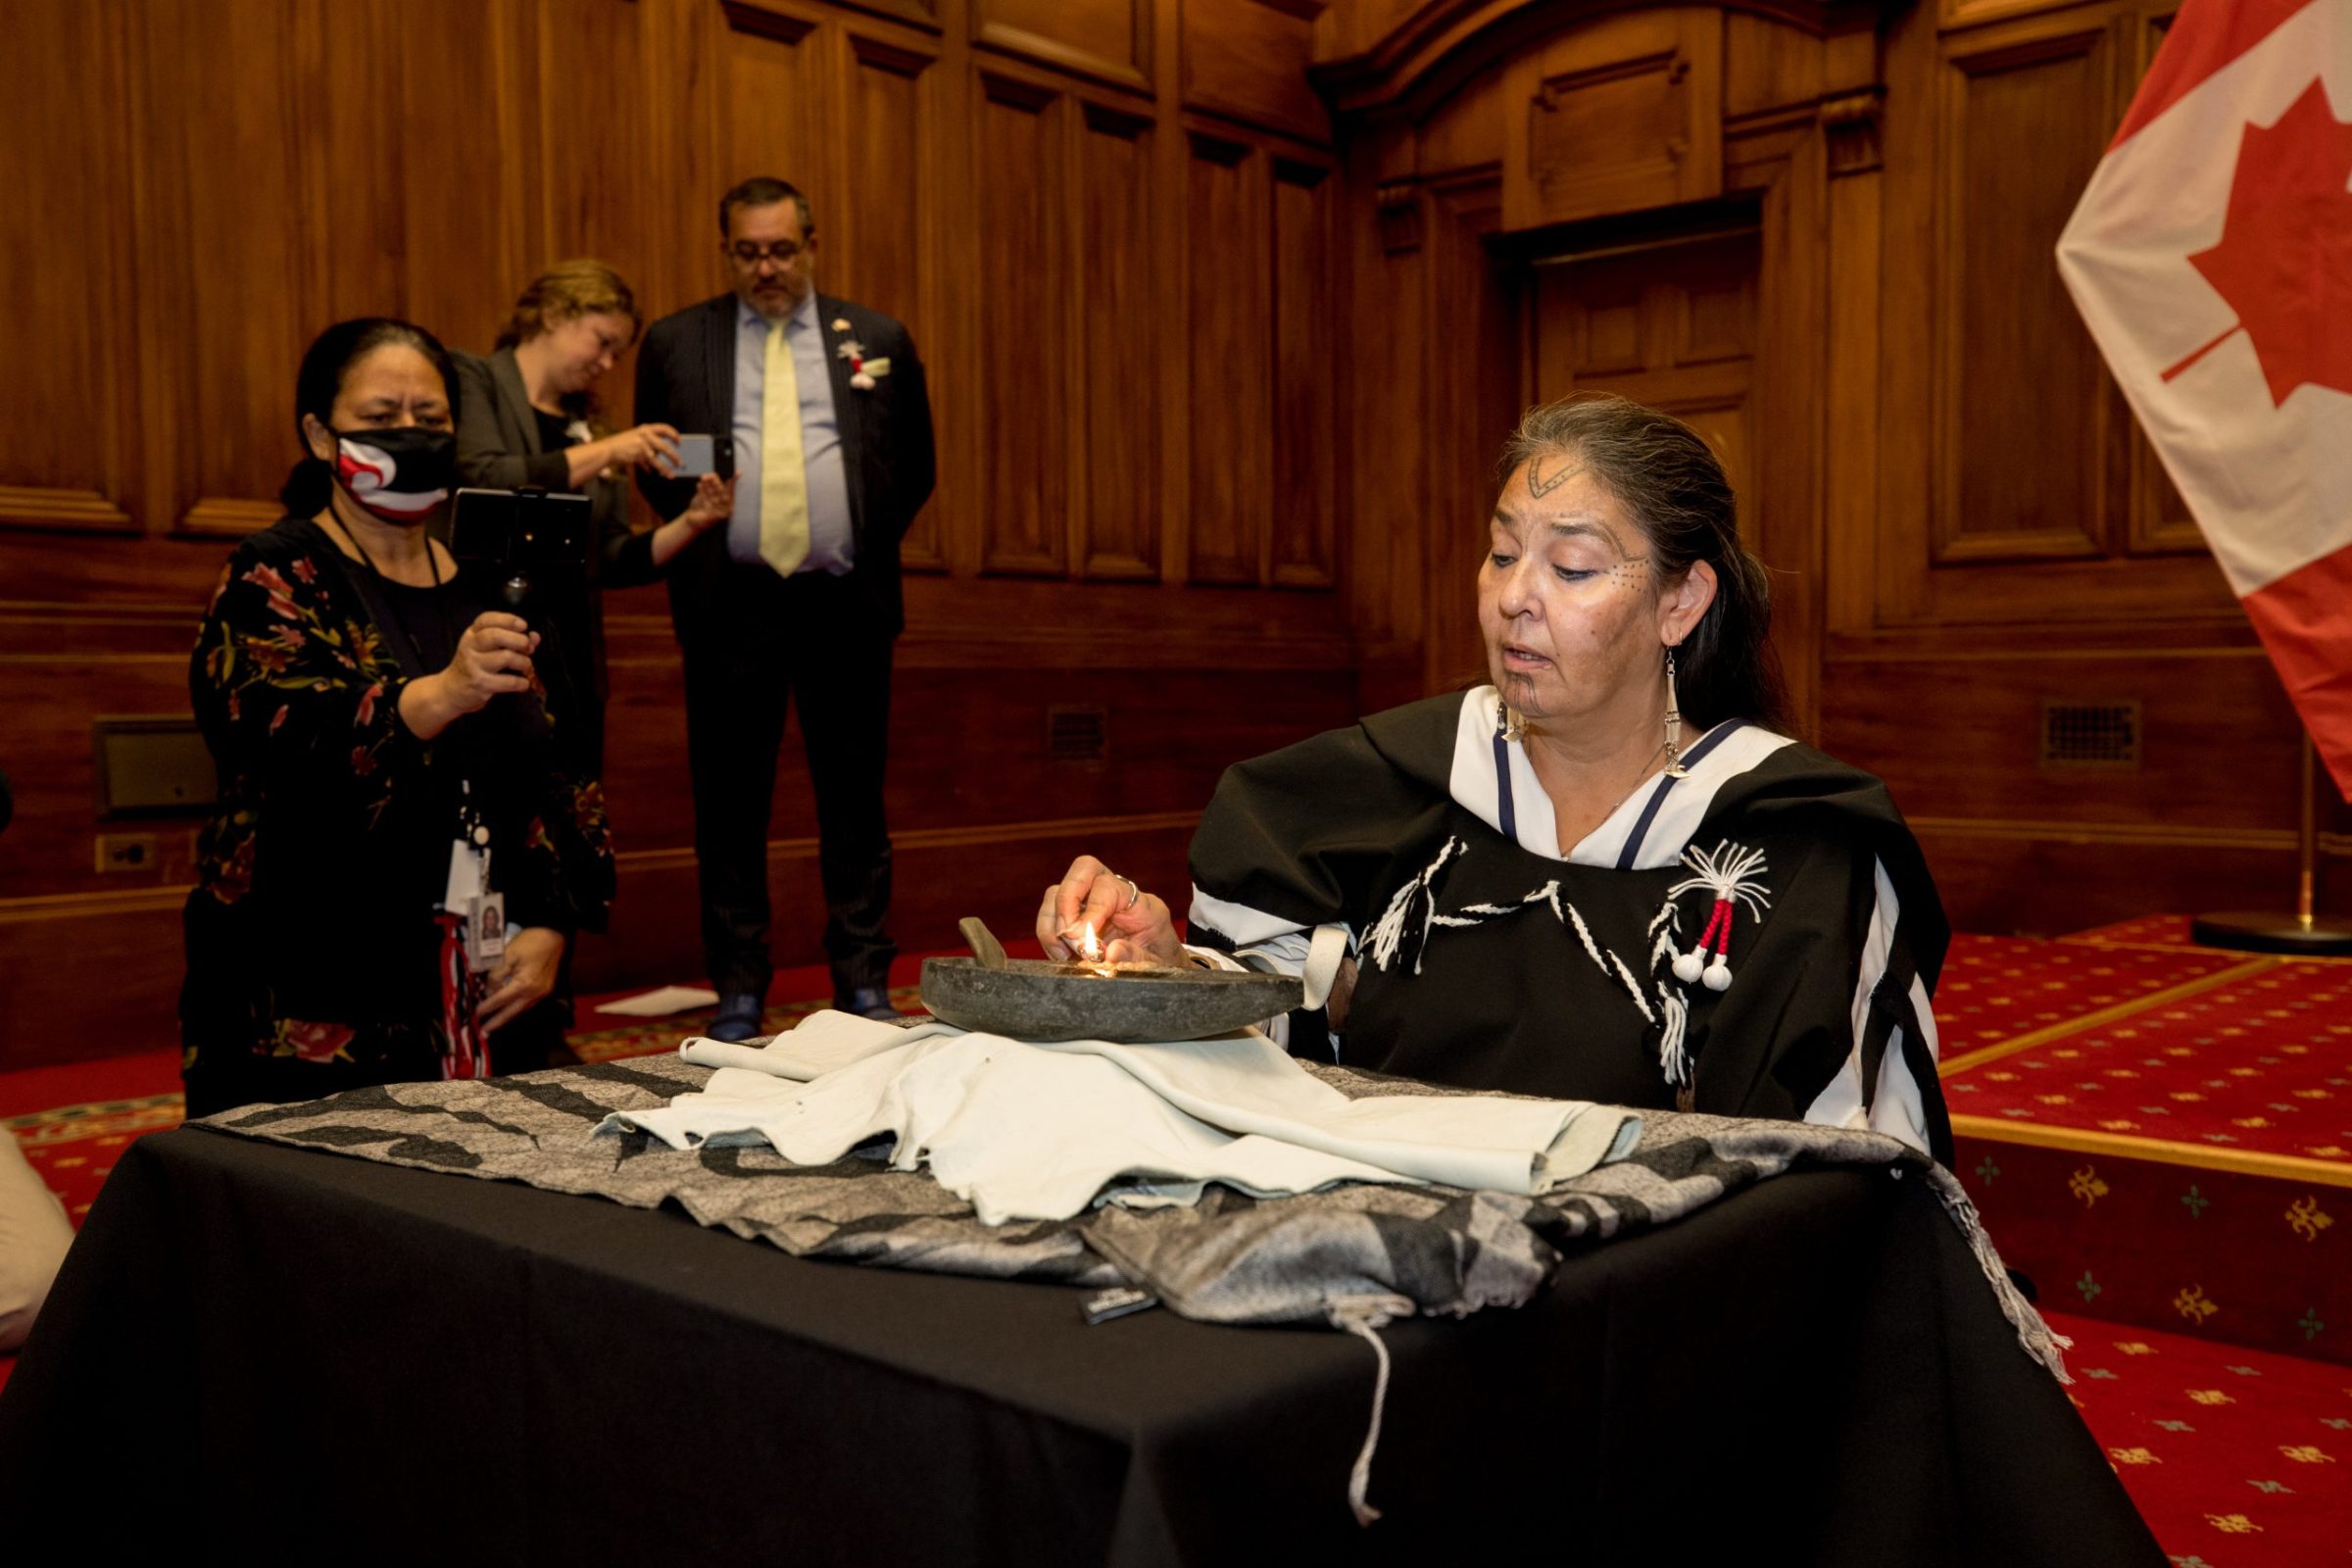 Gerri Sharpe, president of Pauktuutit Inuit Women of Canada, is seen here lighting a qulliq at New Zealand’s parliament in Wellington, the nation’s capital. Sharpe, along with federal Indigenous Services Minister Patty Hajdu, is part of a delegation of Canadian Indigenous leaders to the southern Pacific island nation to build relationships with Māori and government leaders. Both countries are working on an arrangement to promote socioeconomic development of Indigenous Peoples and communities, an emailed statement from Pauktuutit said. (Photo courtesy of Adrian Heke/Pauktuutit)